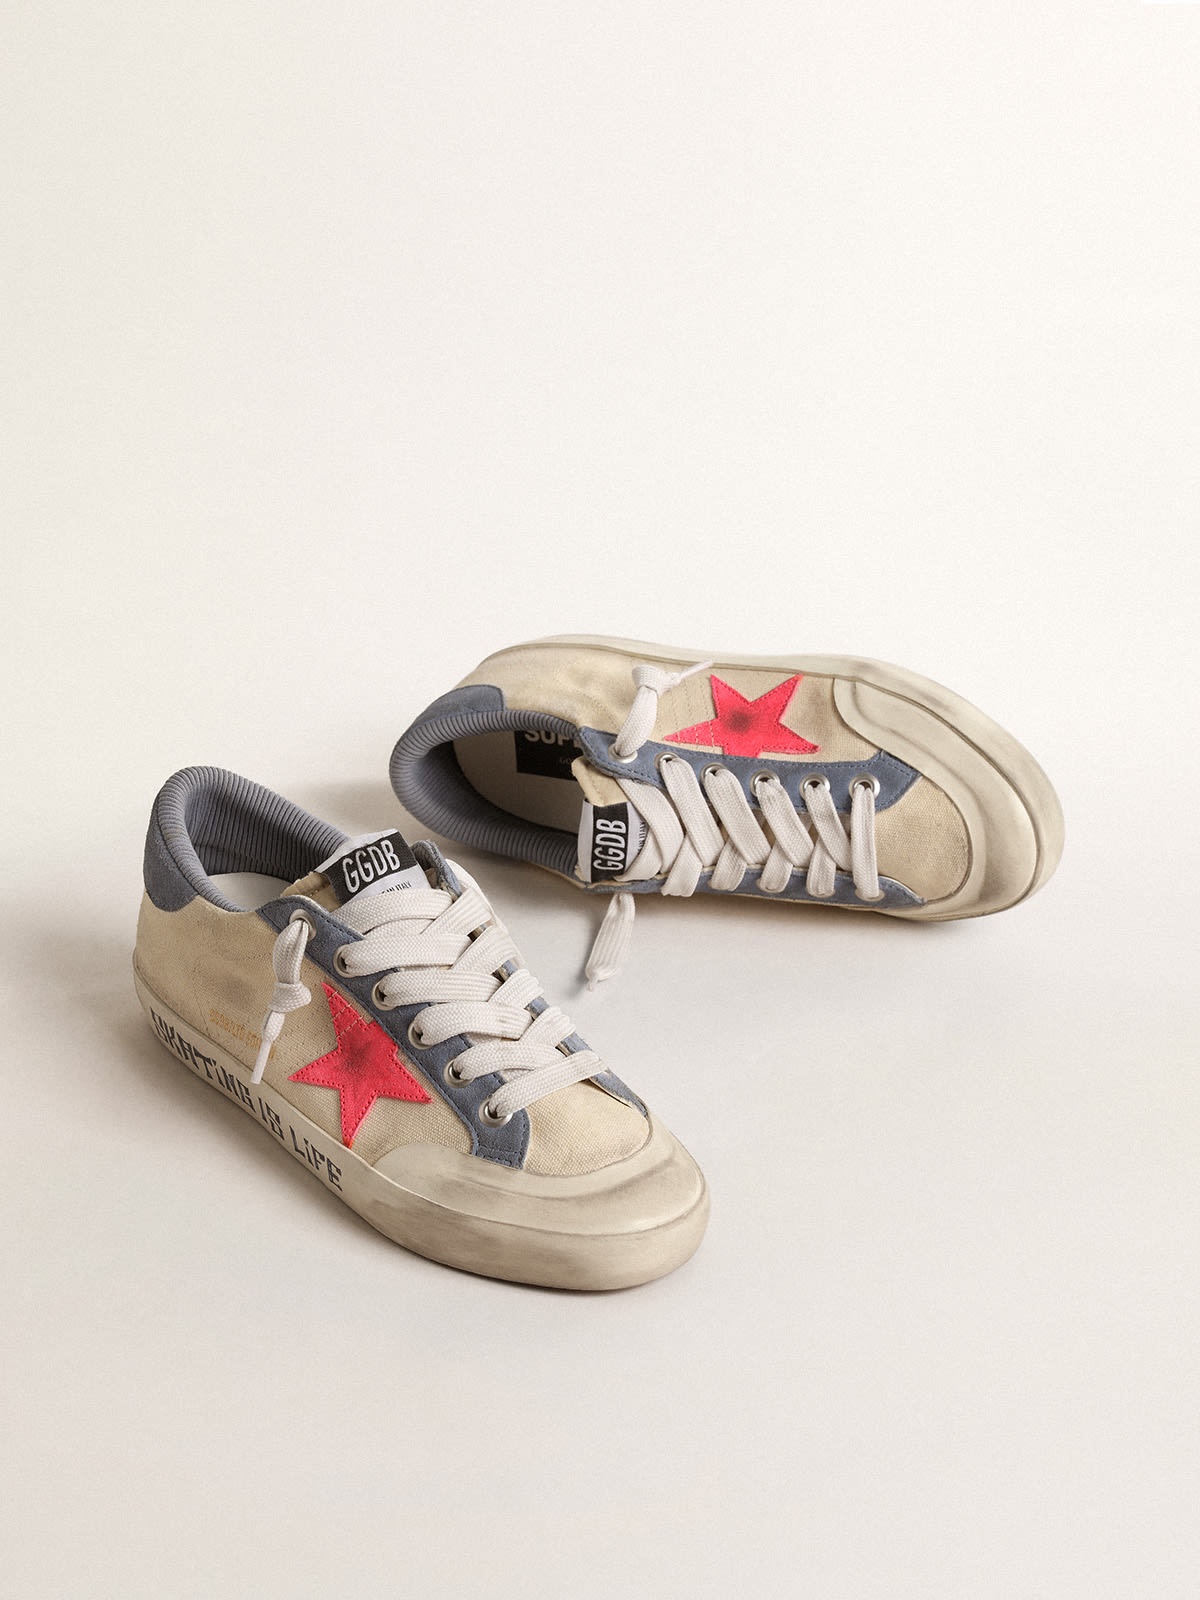 Super-Star Penstar LTD in canvas with lobster-colored suede star - 2